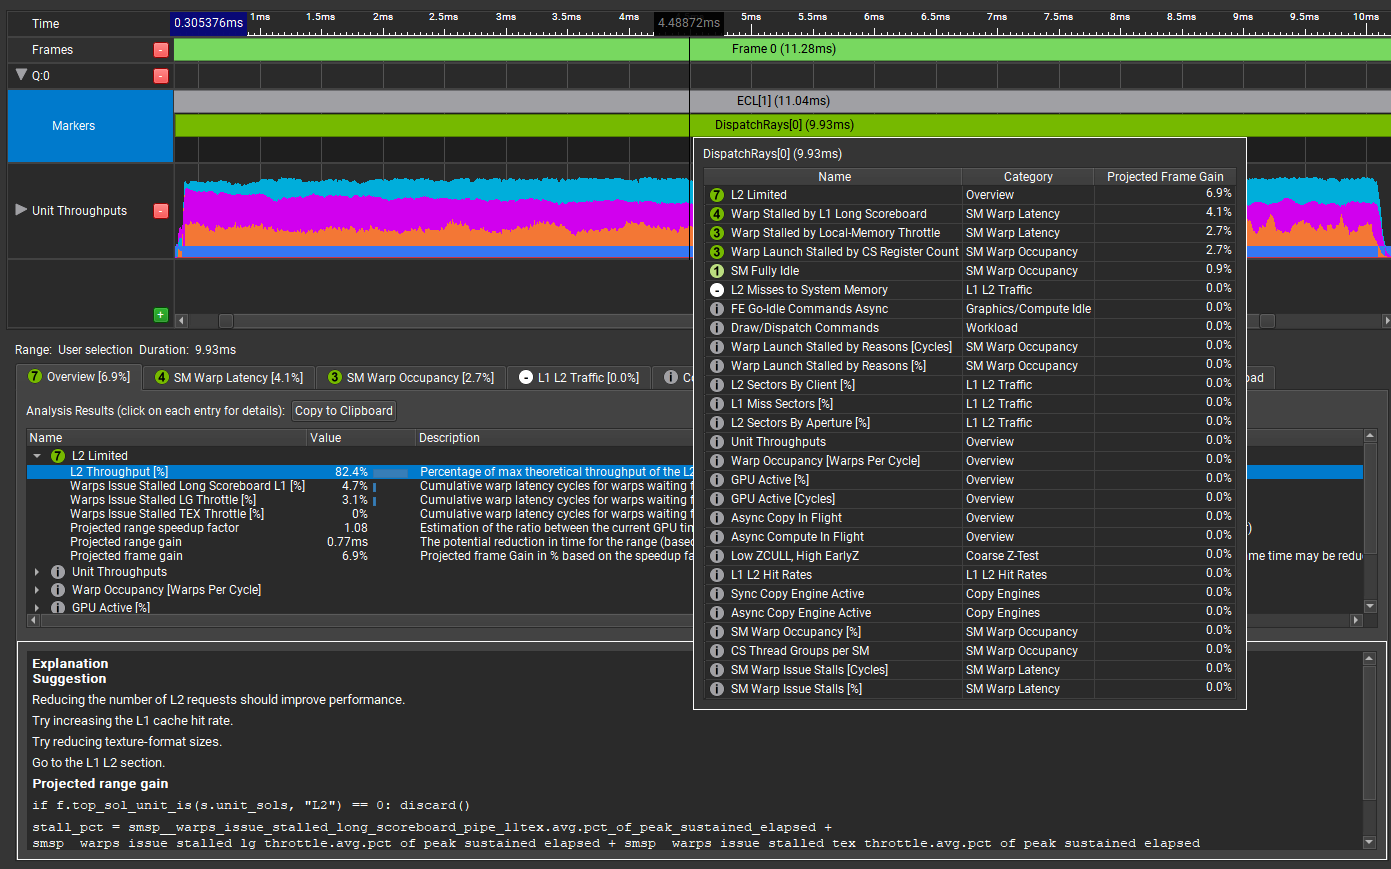 Screenshot of the Trace Analysis results with a large tooltip overlay.